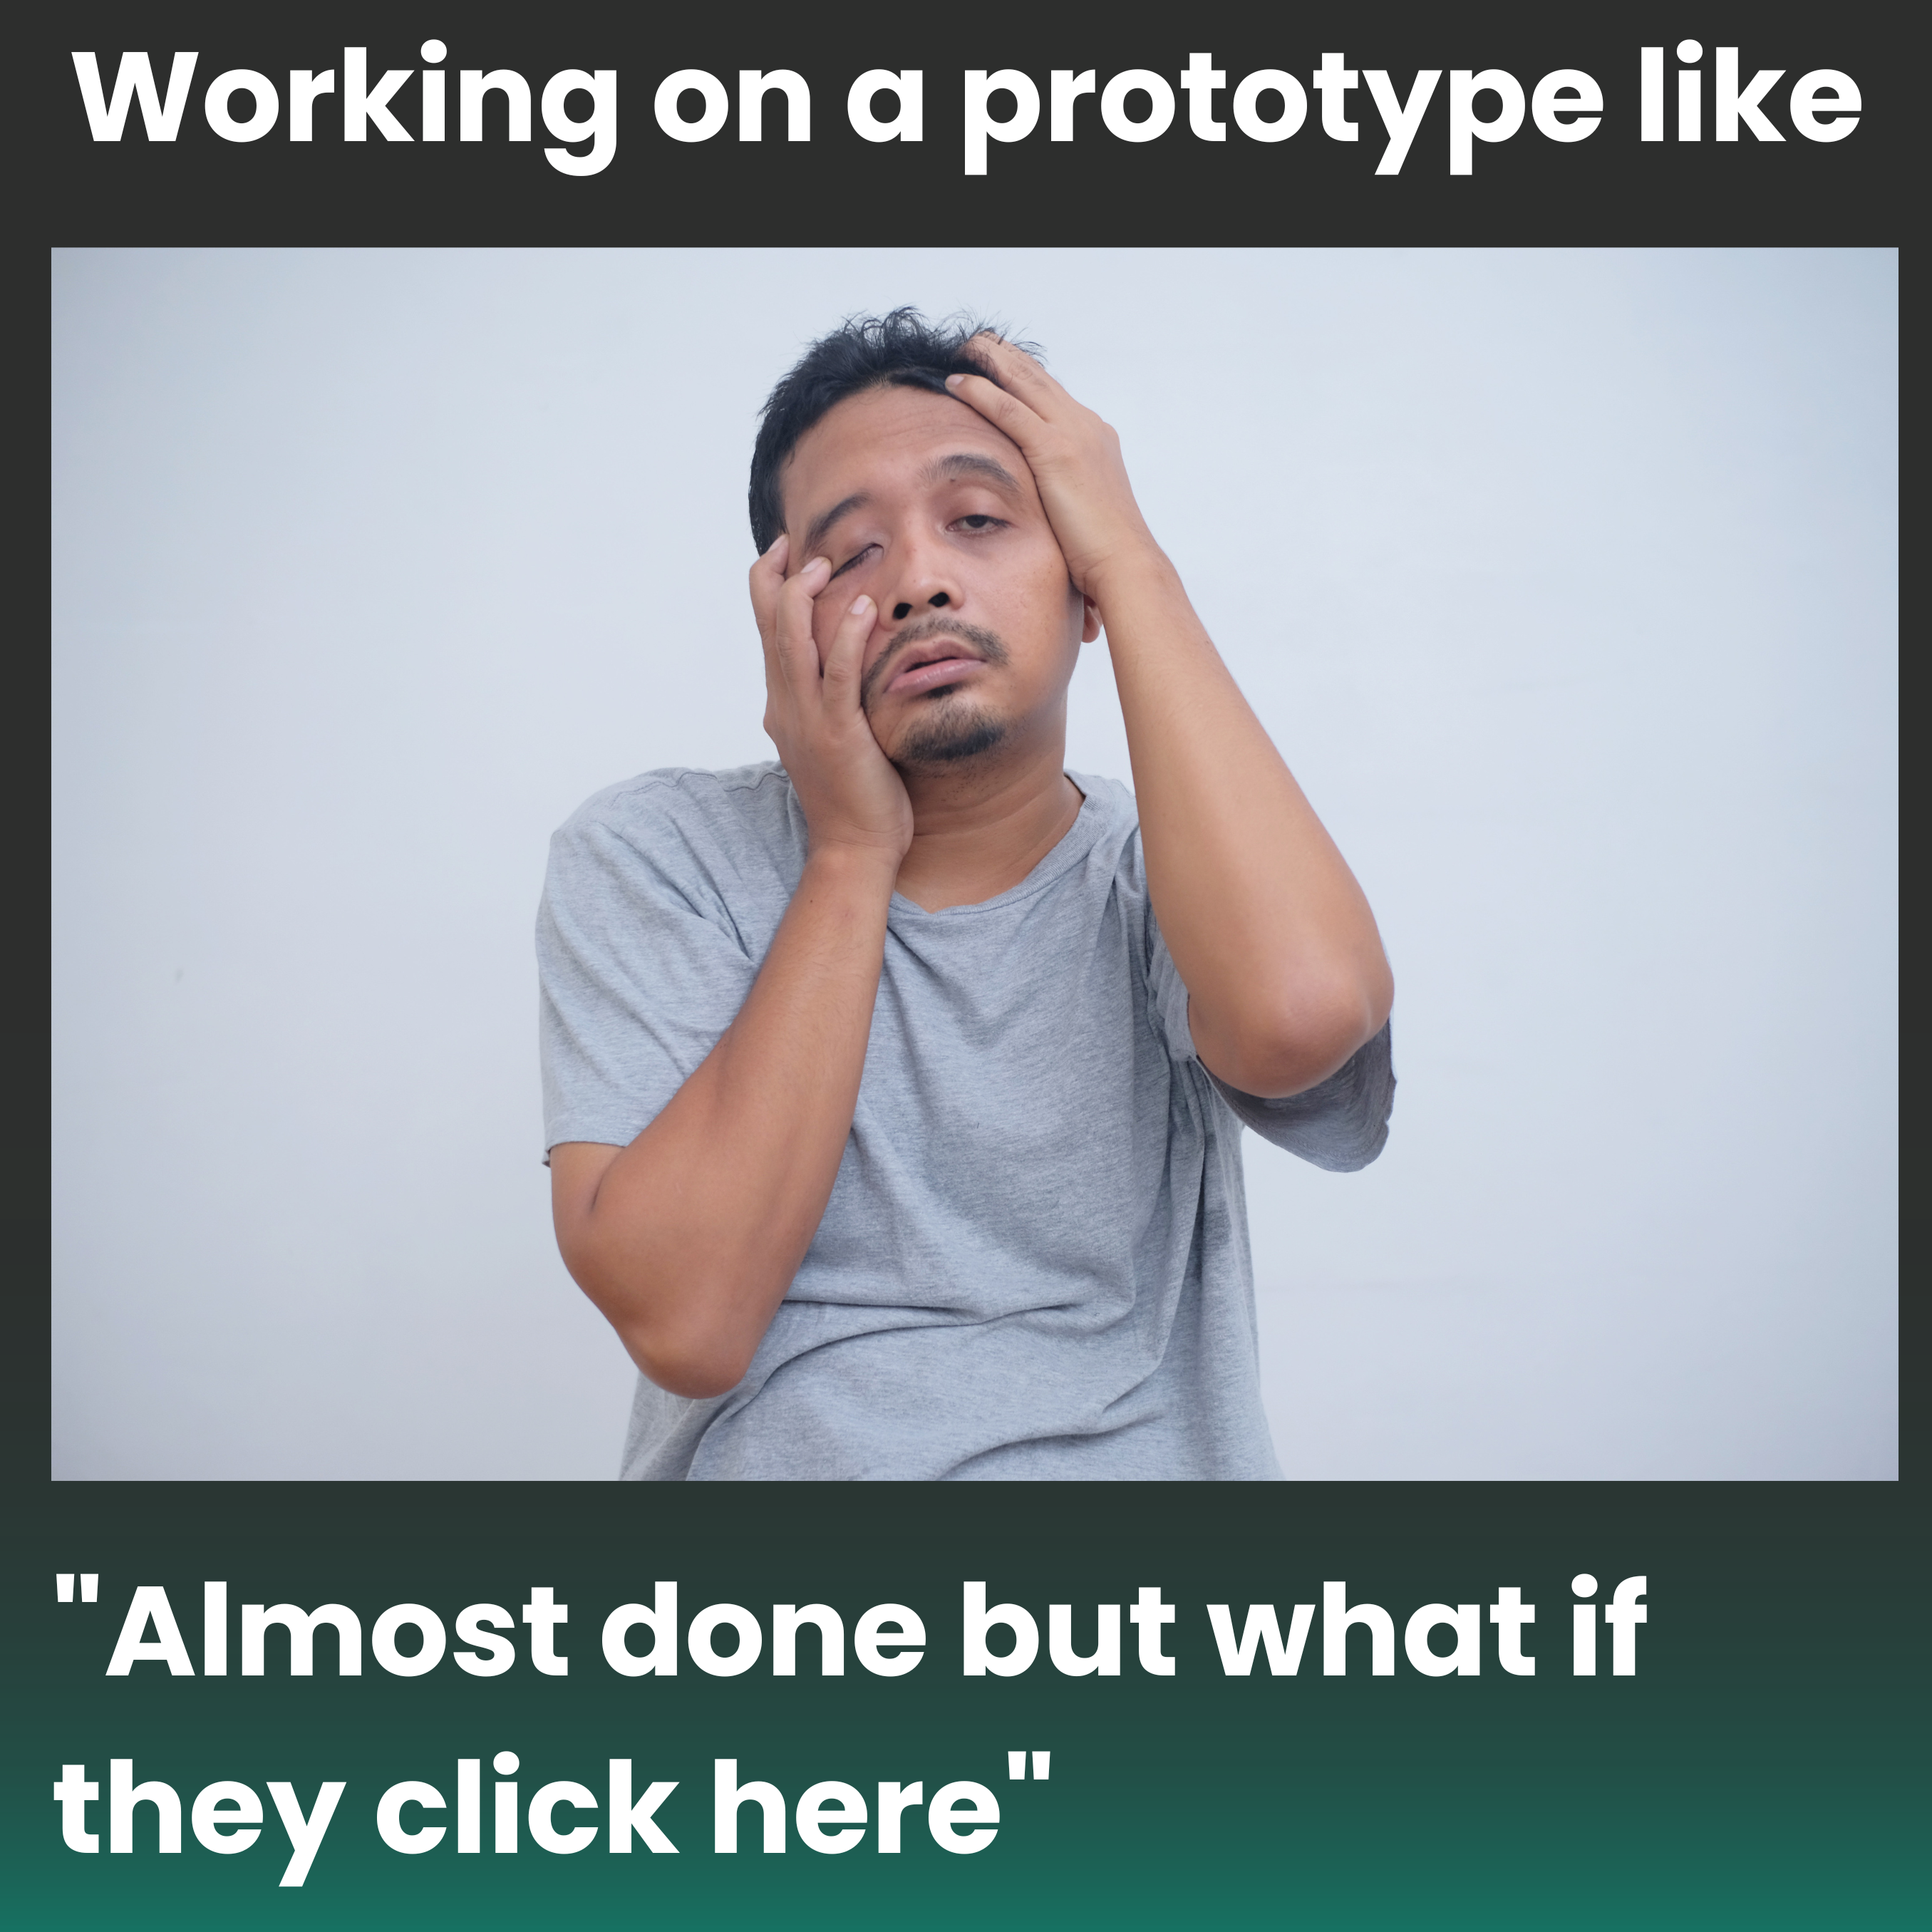 IndieFolio blog: User research meme on prototyping